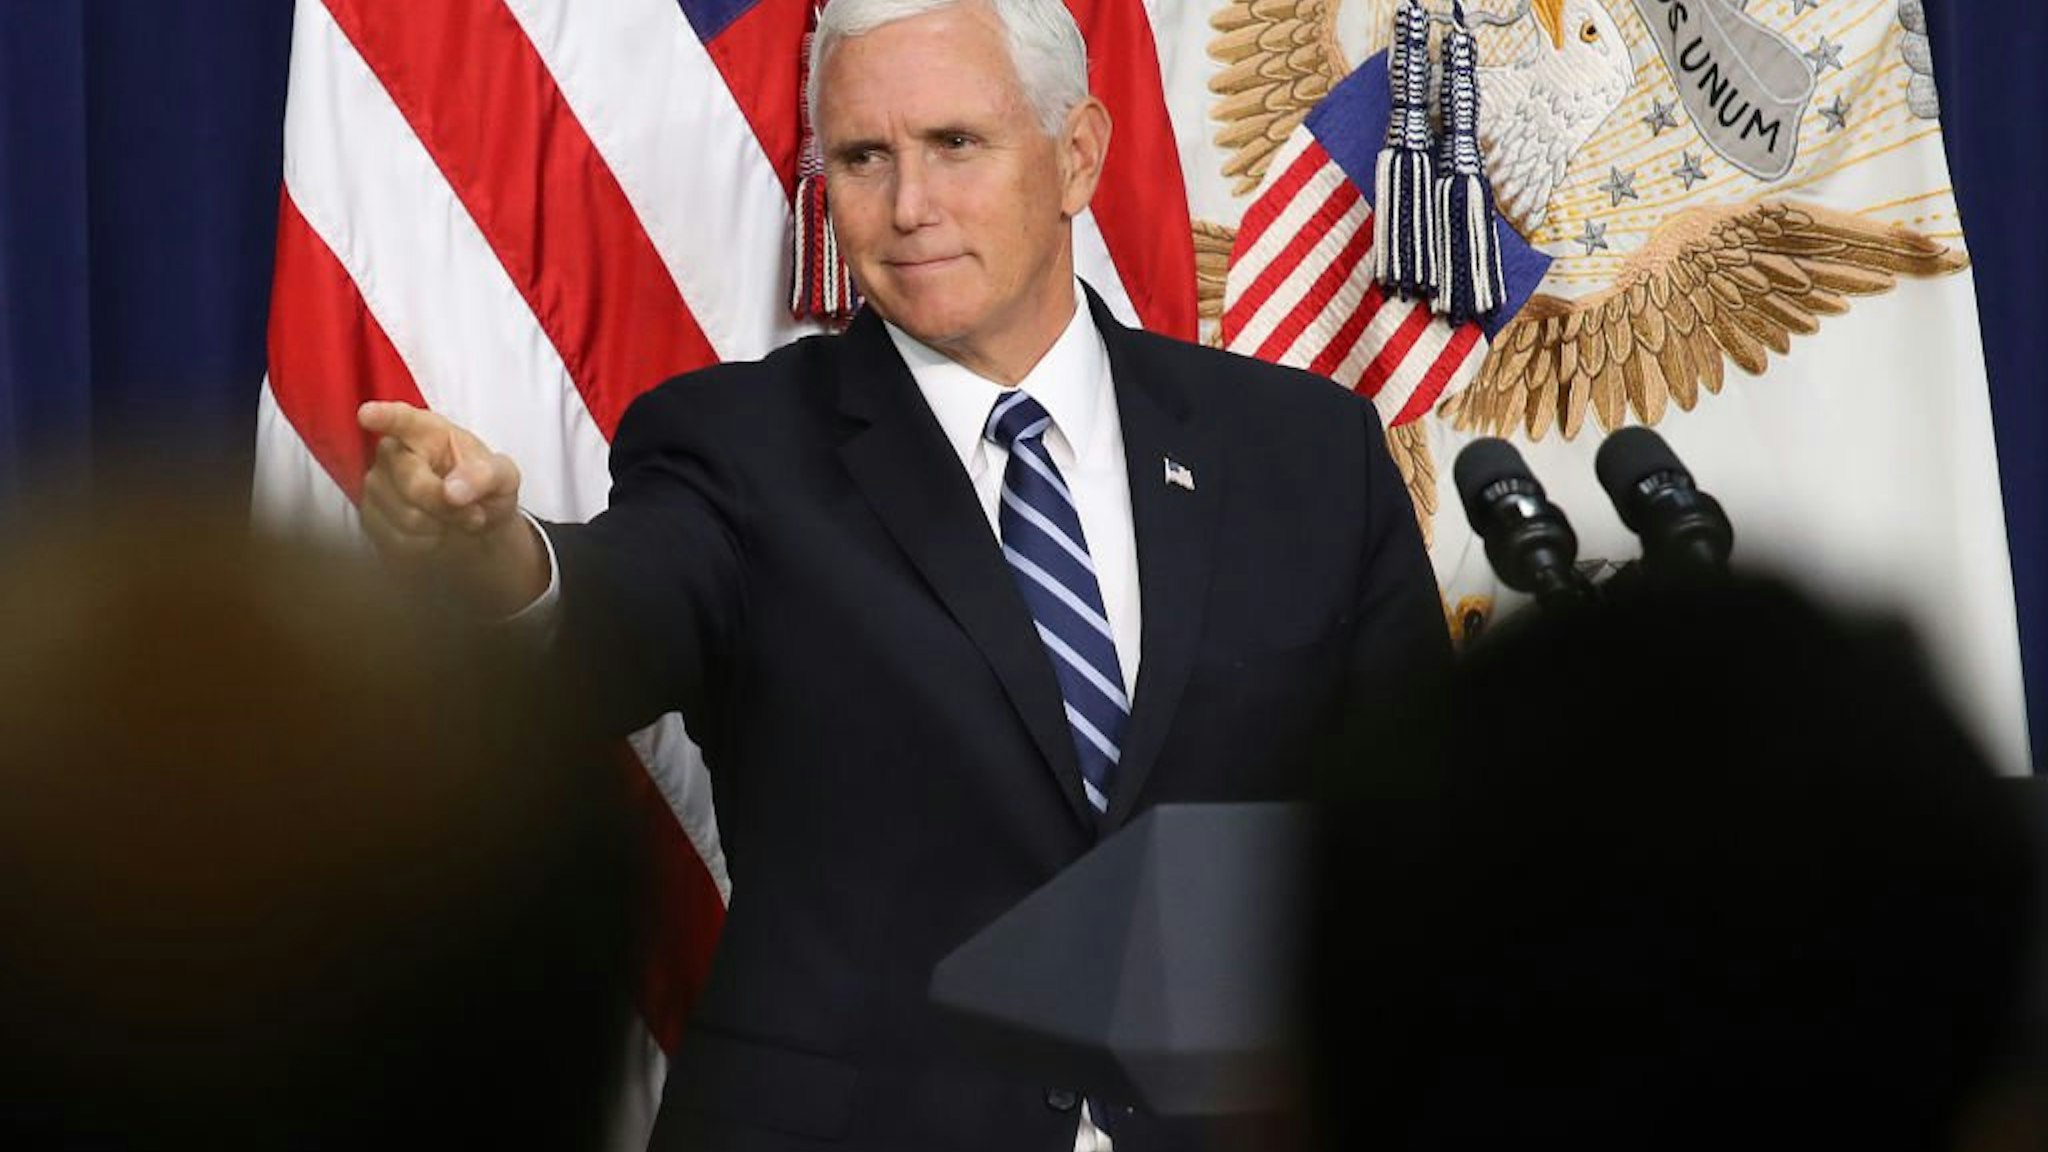 U.S. Vice President Mike Pence concludes his remarks during a naturalization ceremony September 17, 2019 in Washington, DC.